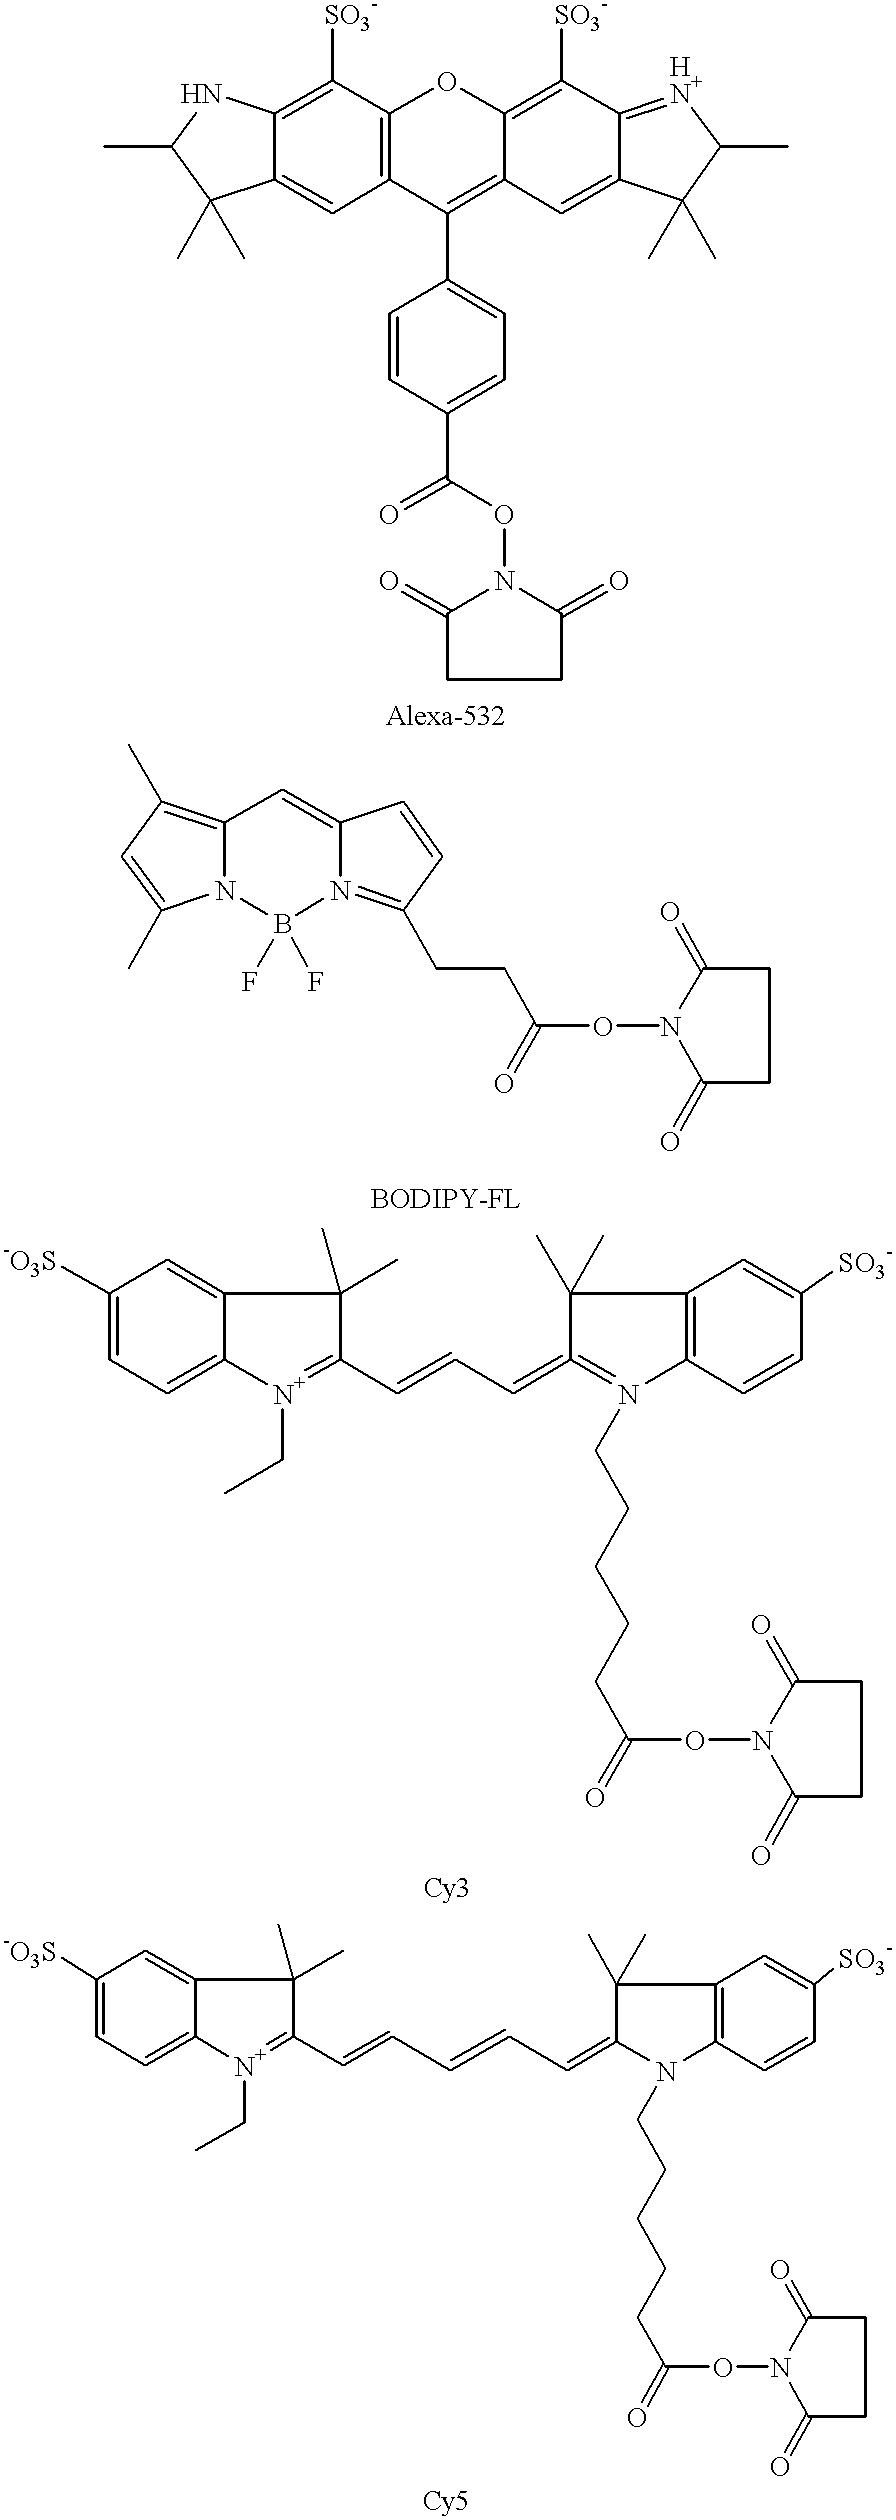 Methods of labeling nucleic acids for use in array based hybridization assays